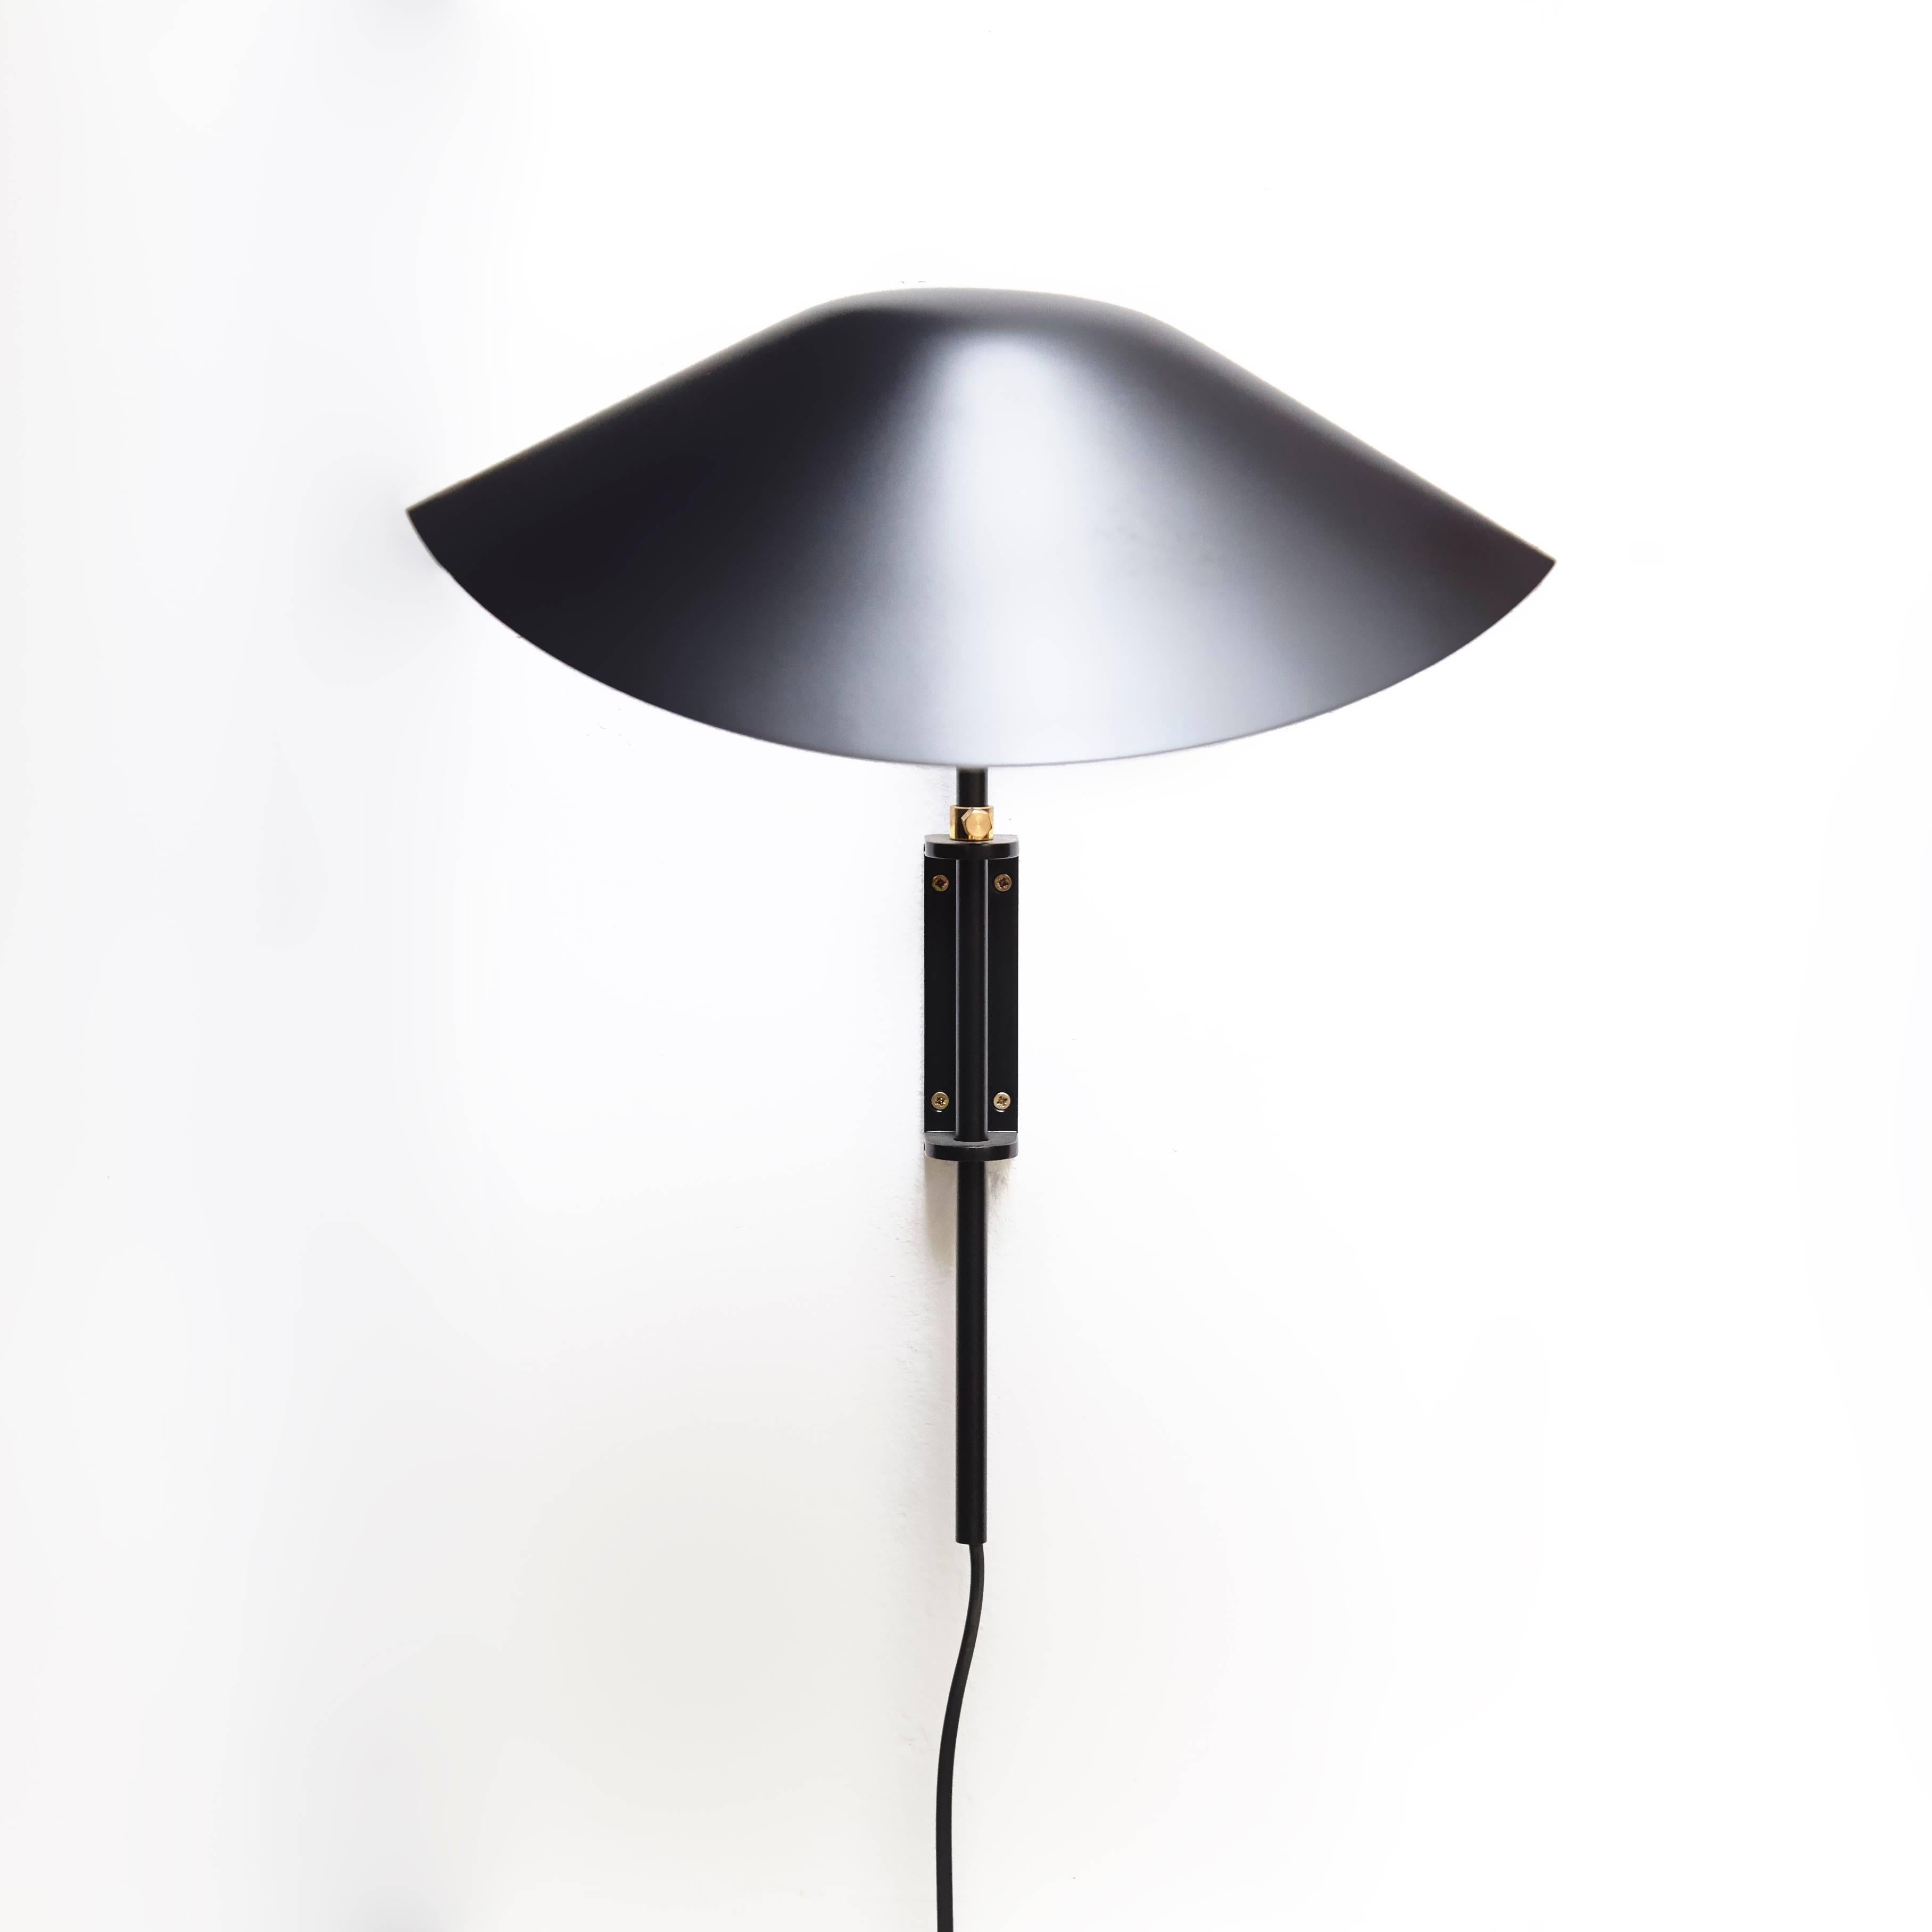 French Serge Mouille Mid-Century Modern Black Anthony Wall Lamp Whit Fixing Bracket